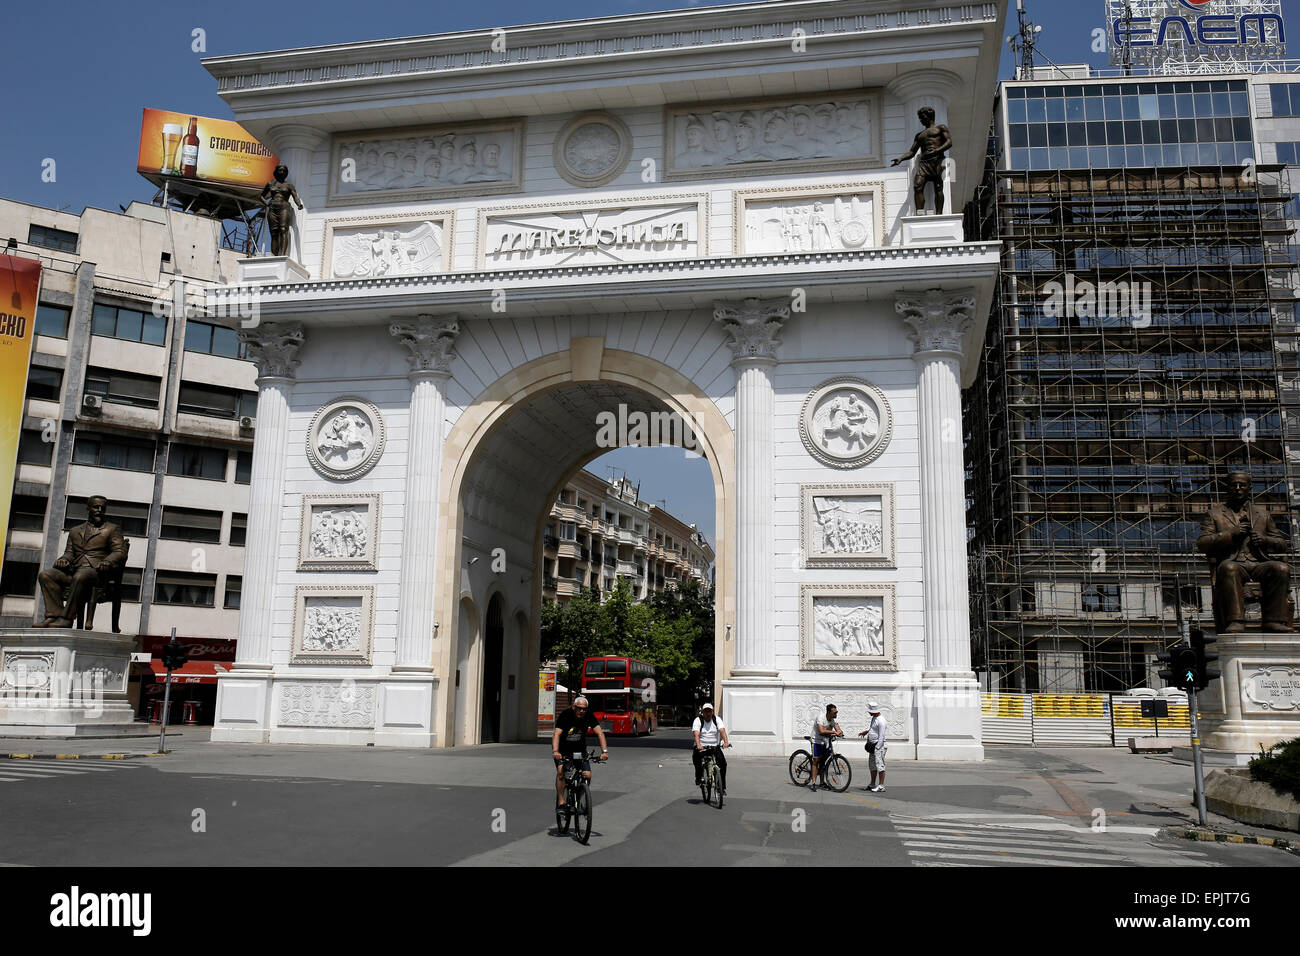 Porta Macedonia, a triumphal arch situated on 11 October Street, near Macedonia Square in central Skopje, FYROM on May 17, 2015. Stock Photo